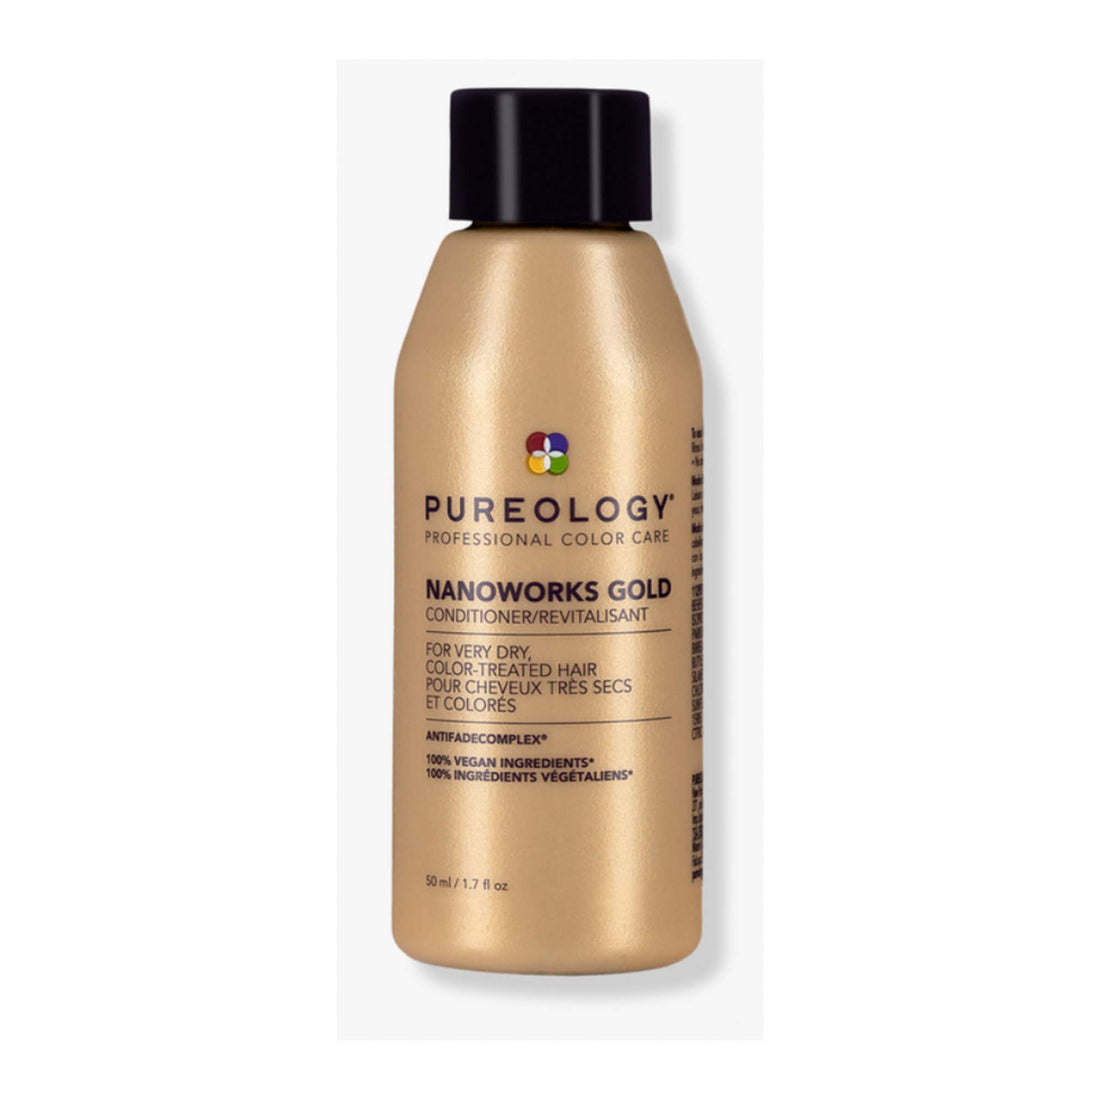 Pureology Nanoworks Gold Conditioner 1.7oz